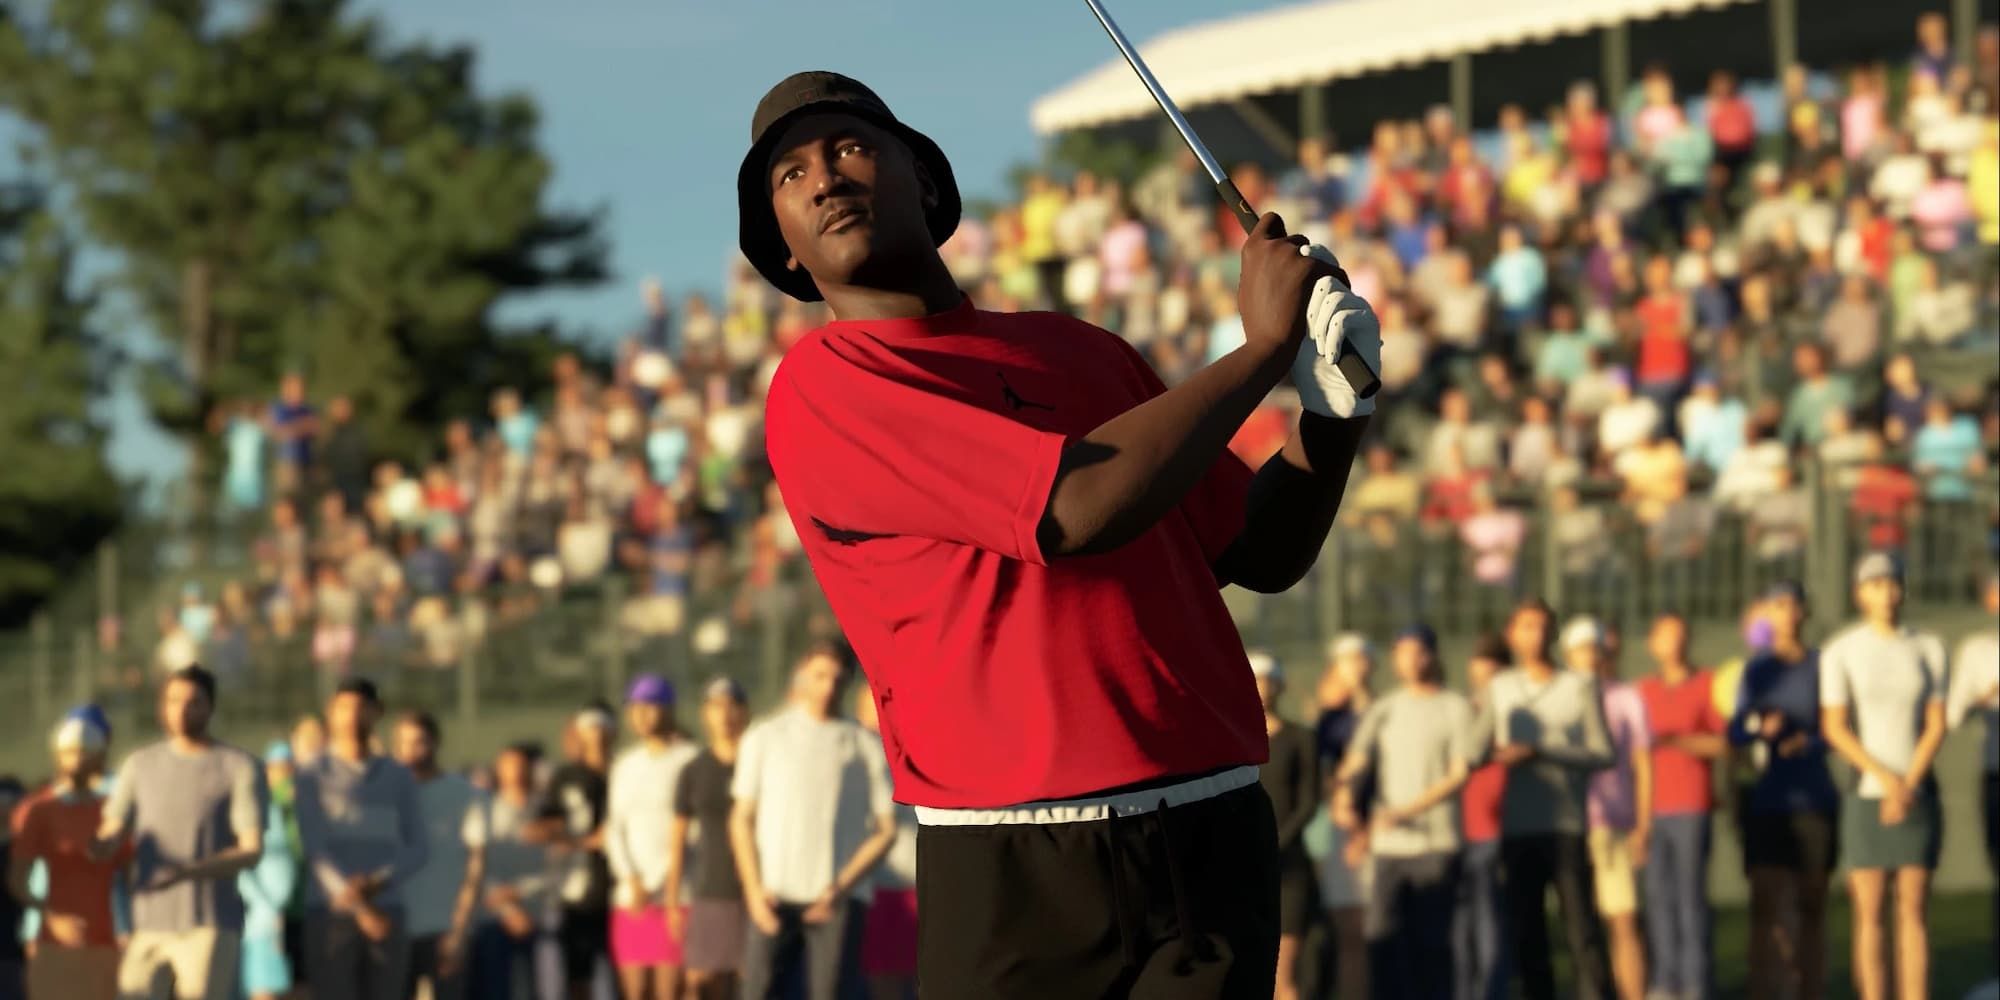 Michael Jordan stands in front of a large crowd while following through after a short swing.